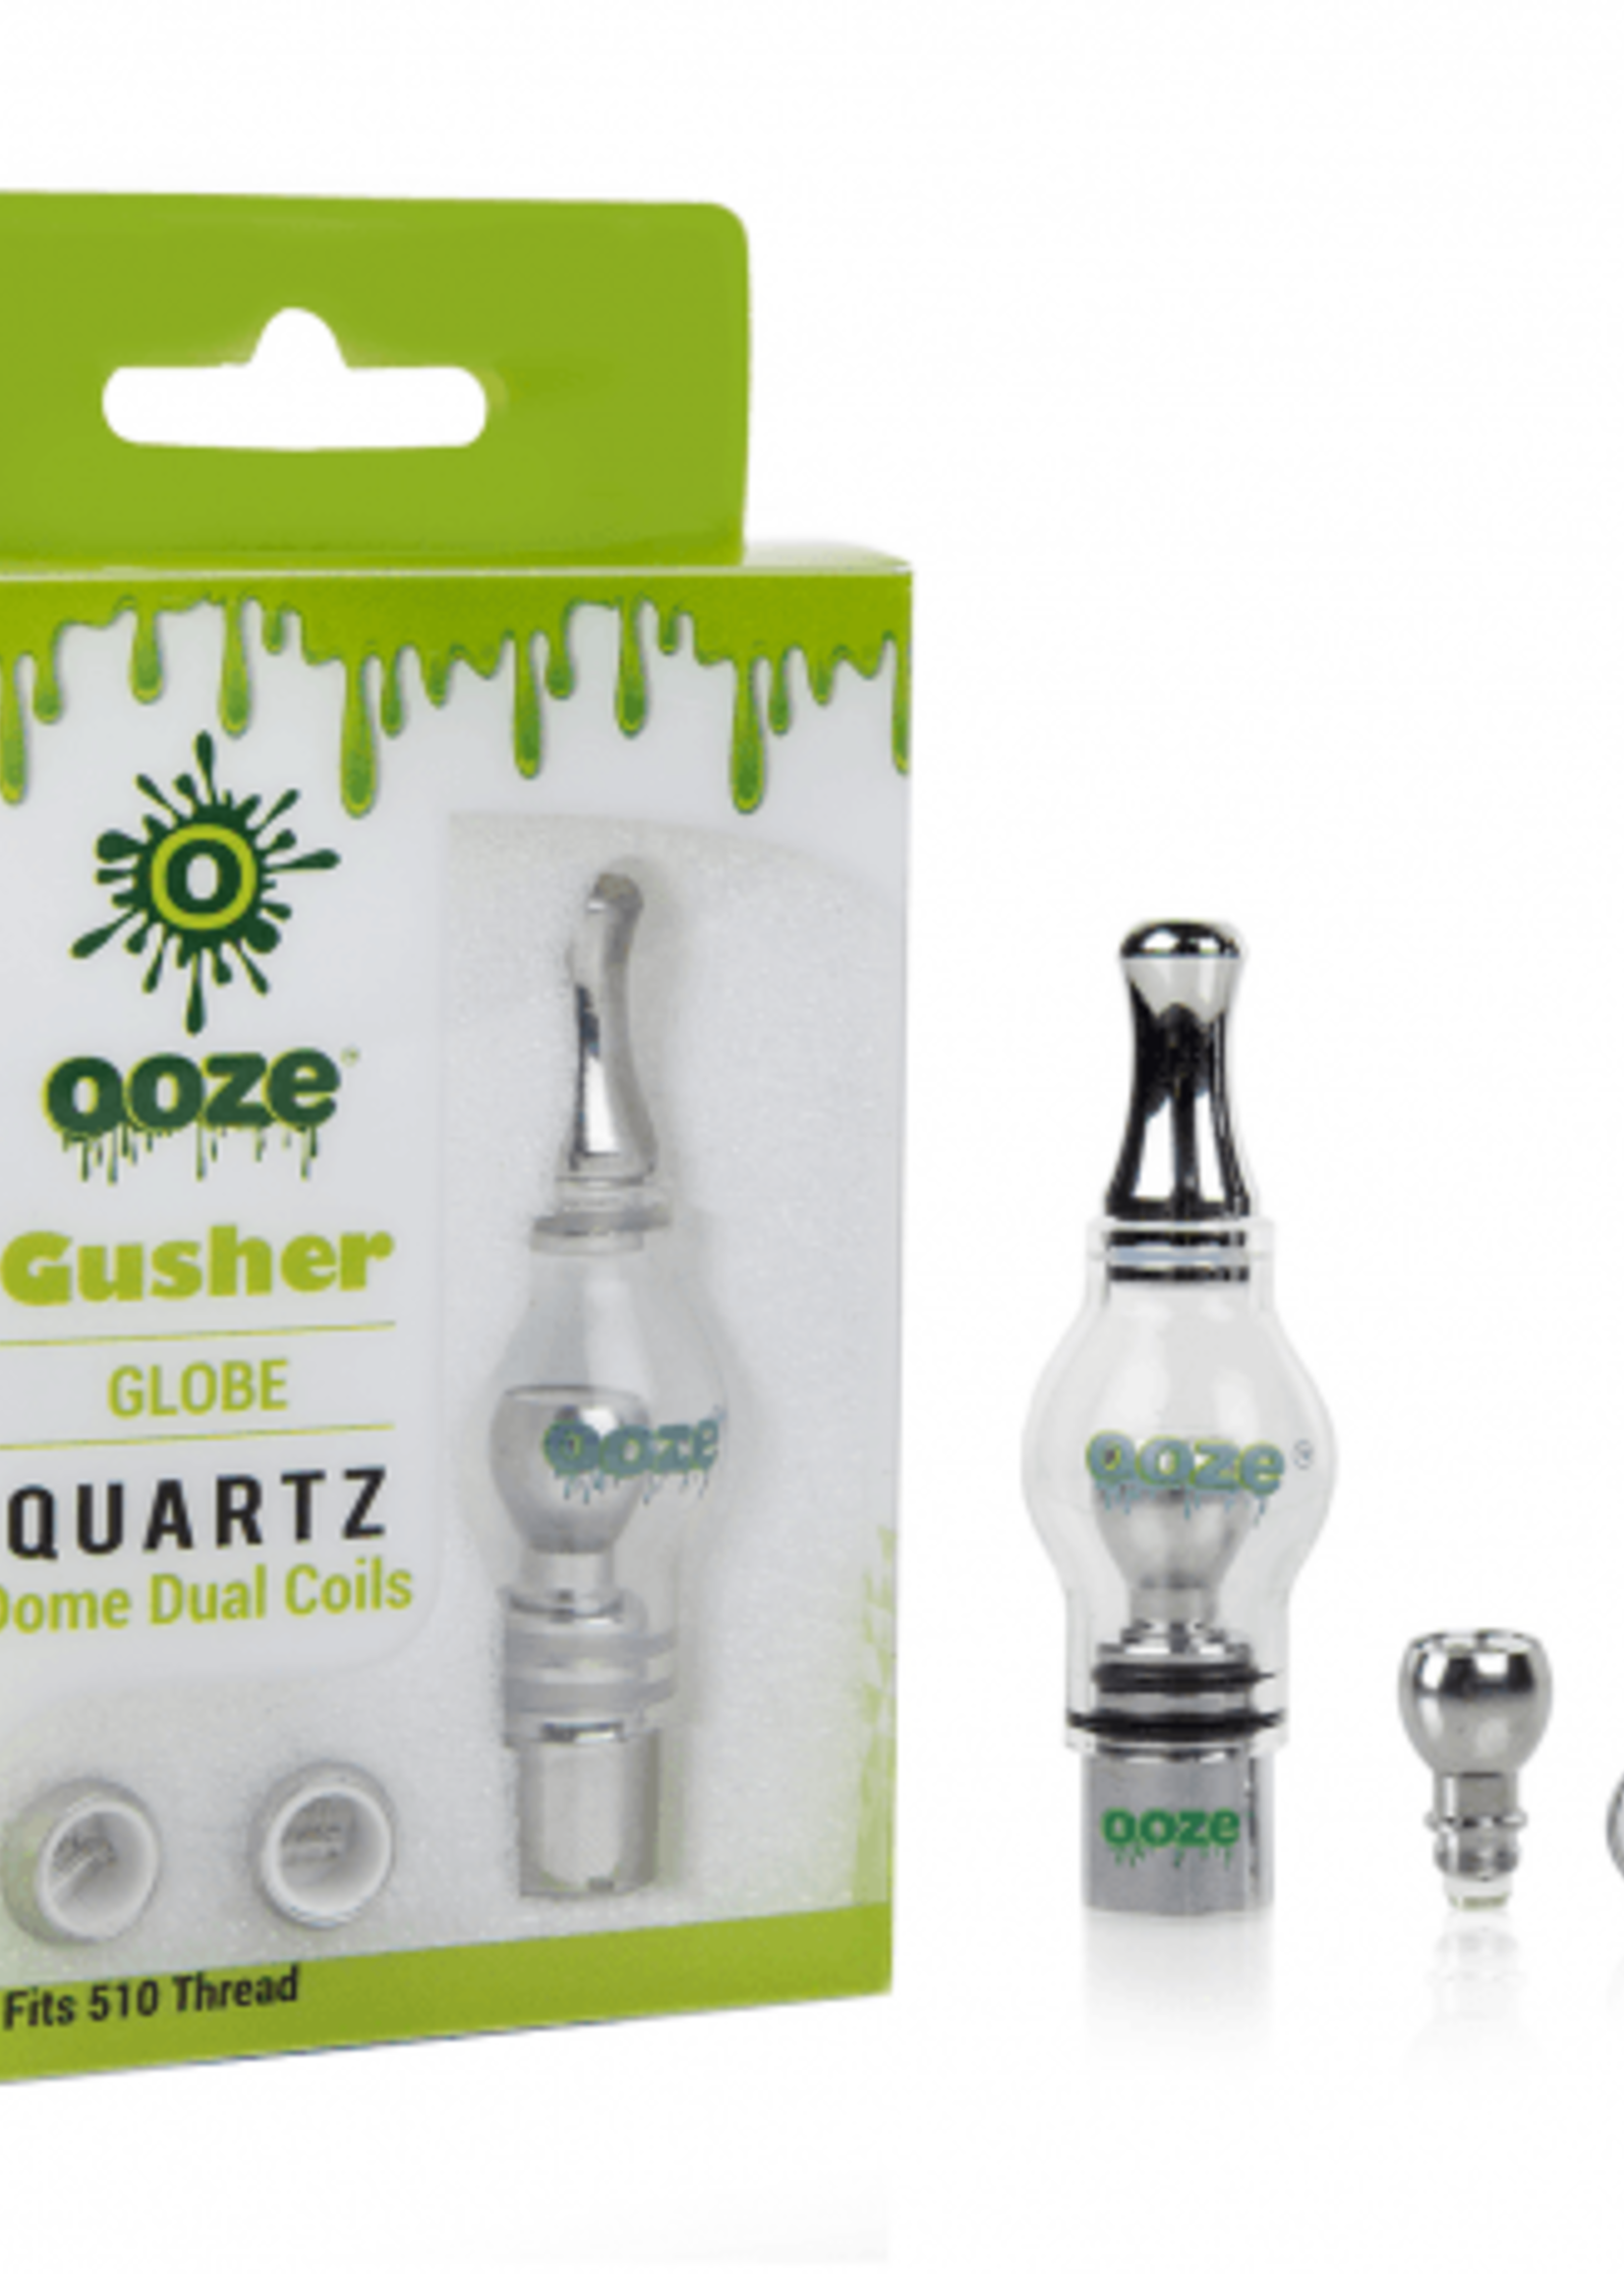 OOZE Gusher Glass Globe Atomizer 3 Coils